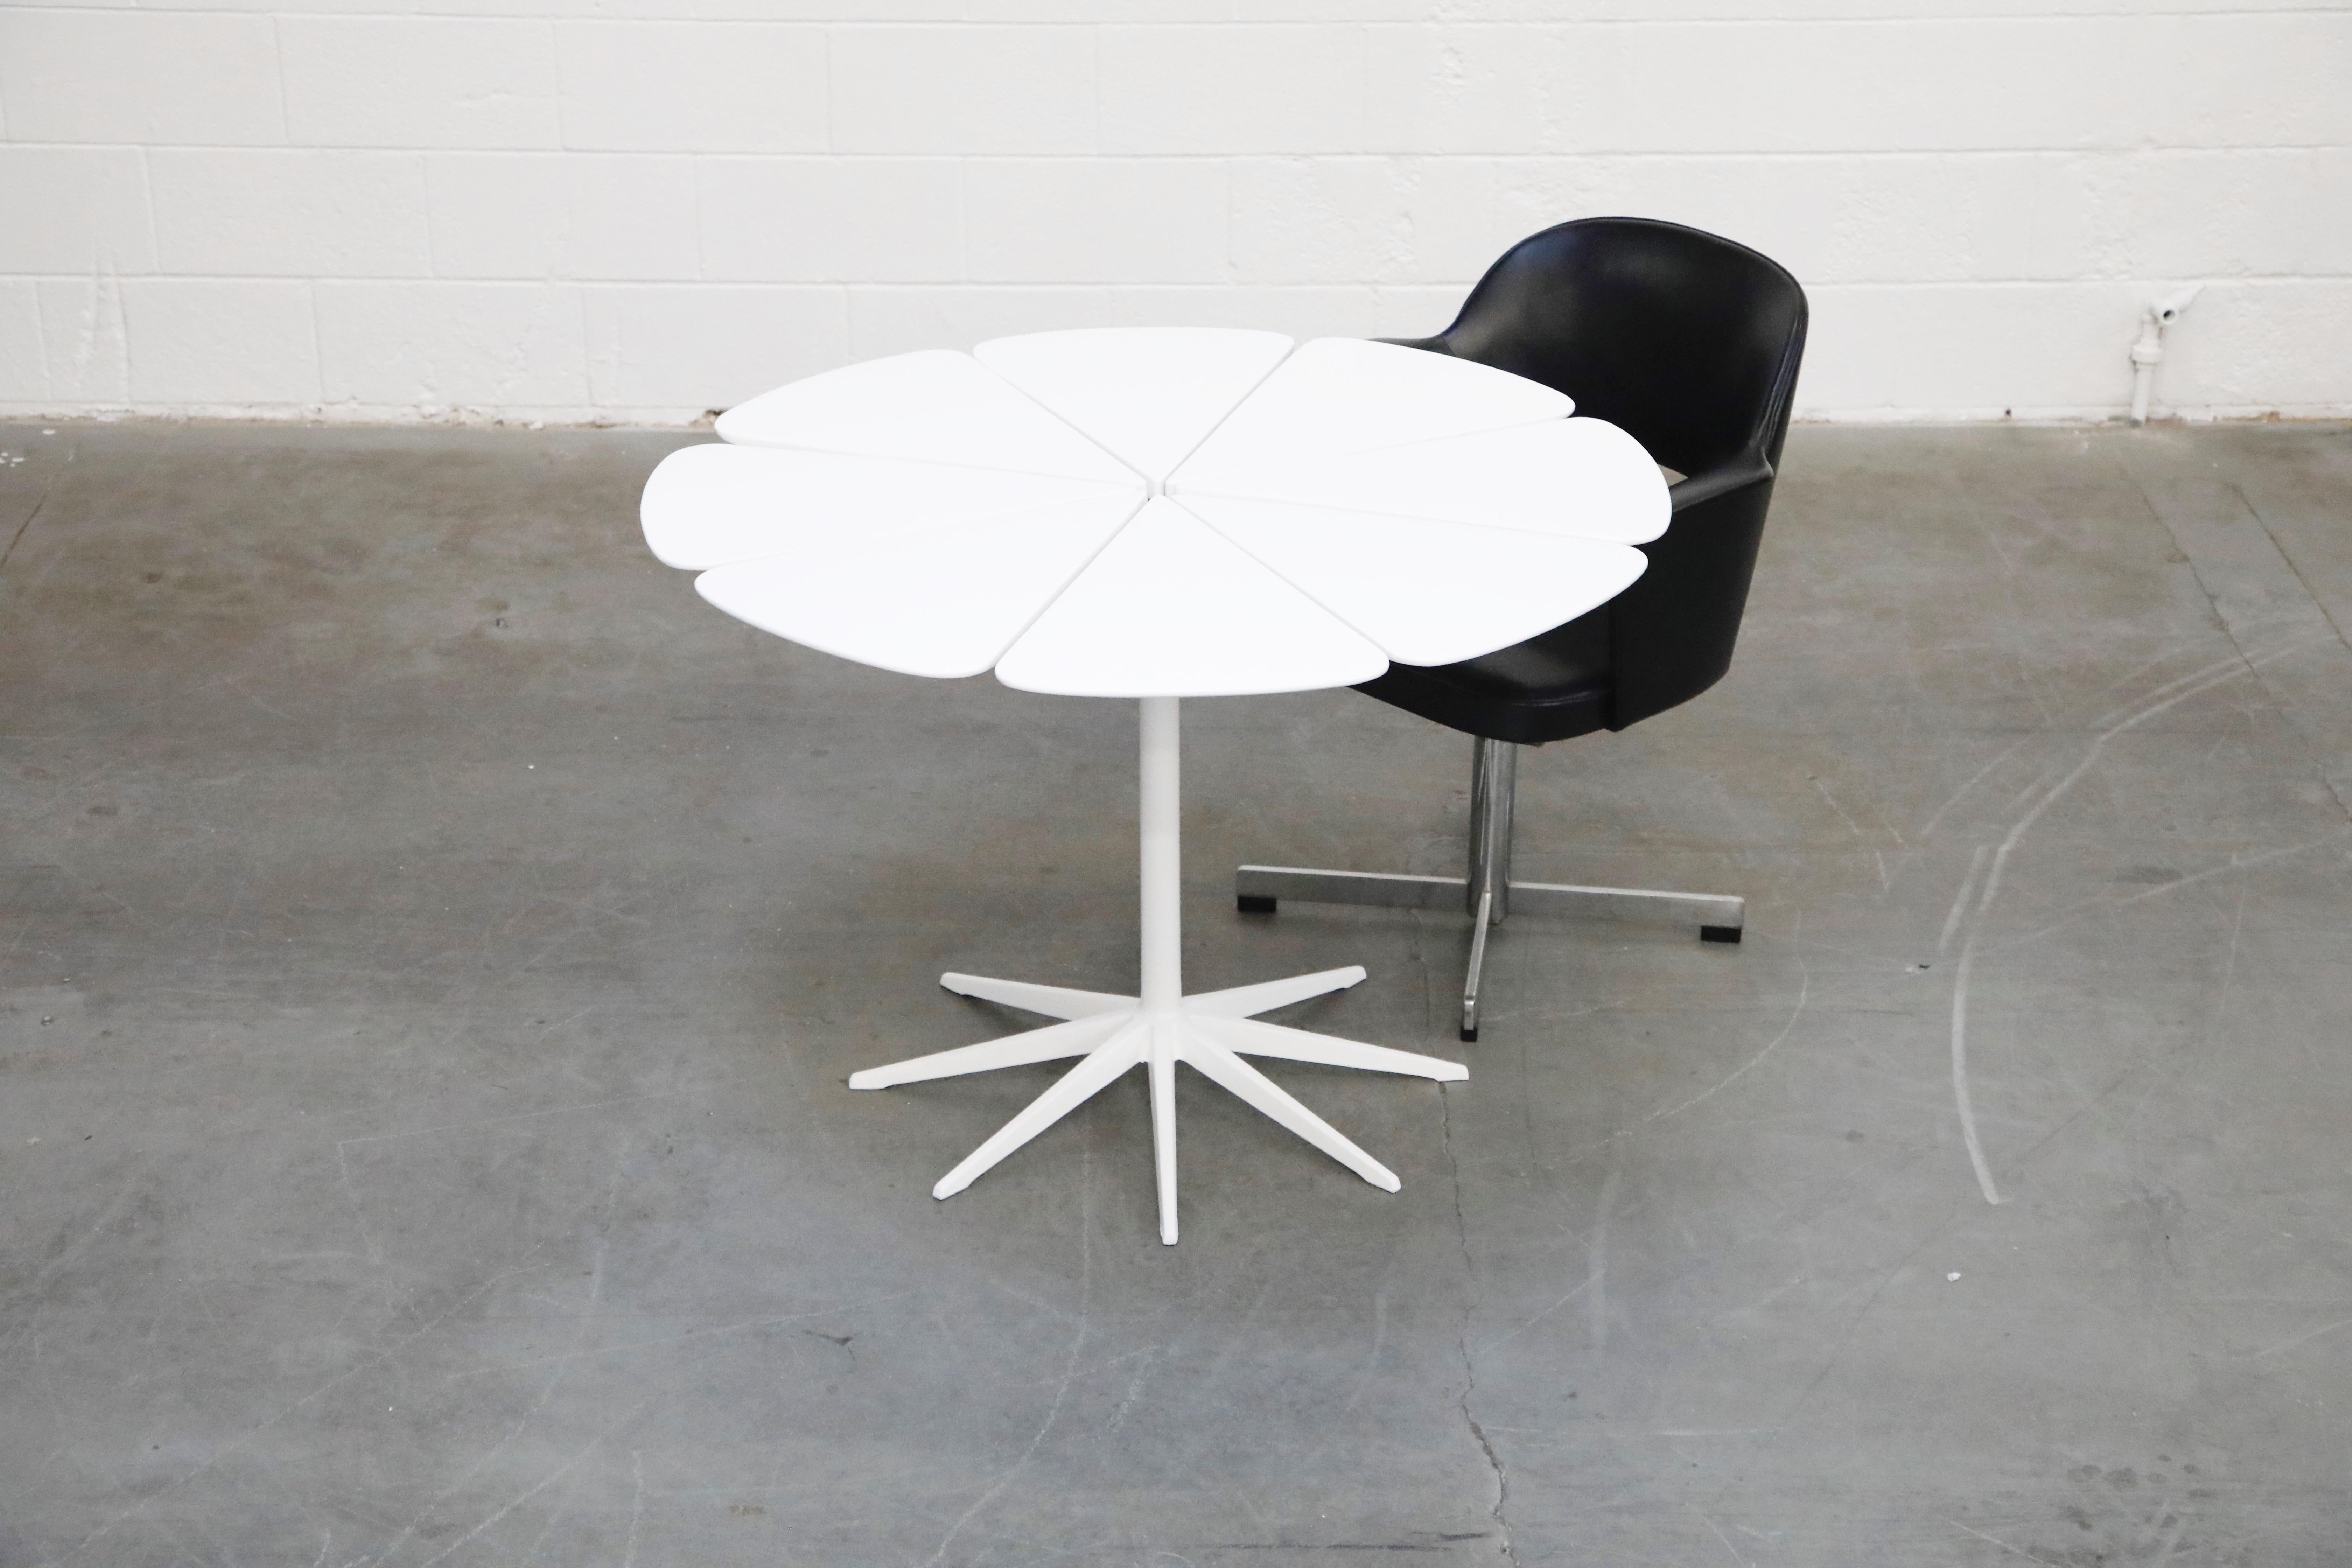 Mid-20th Century 'Petal' Dining Table Richard Schultz for Knoll International, Signed